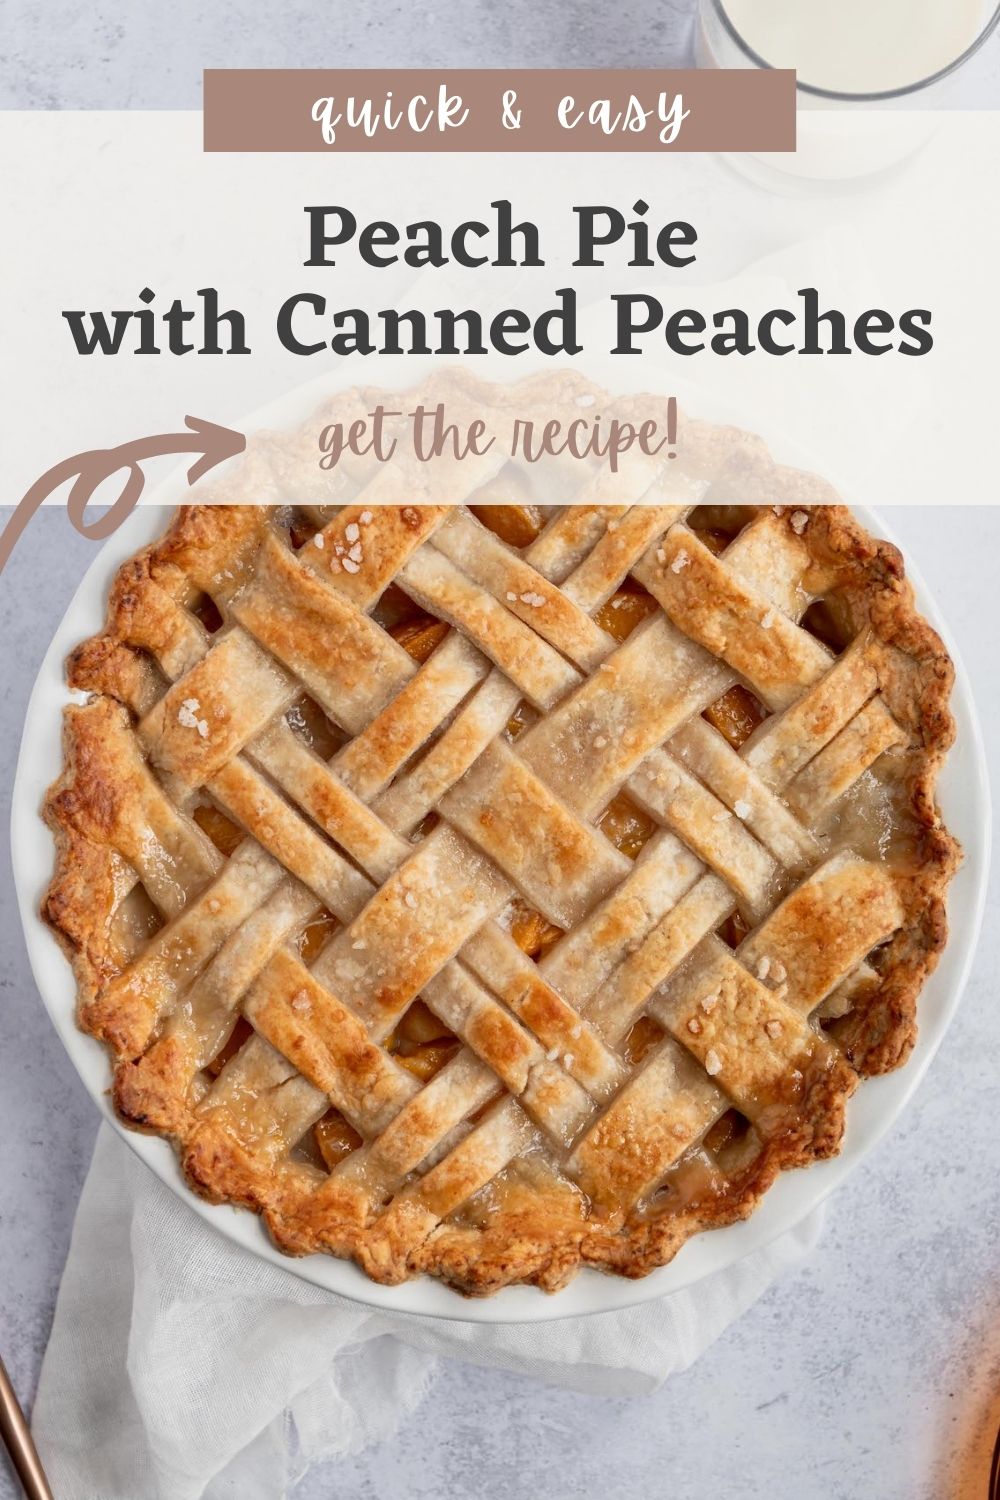 Peach Pie with Canned Peaches